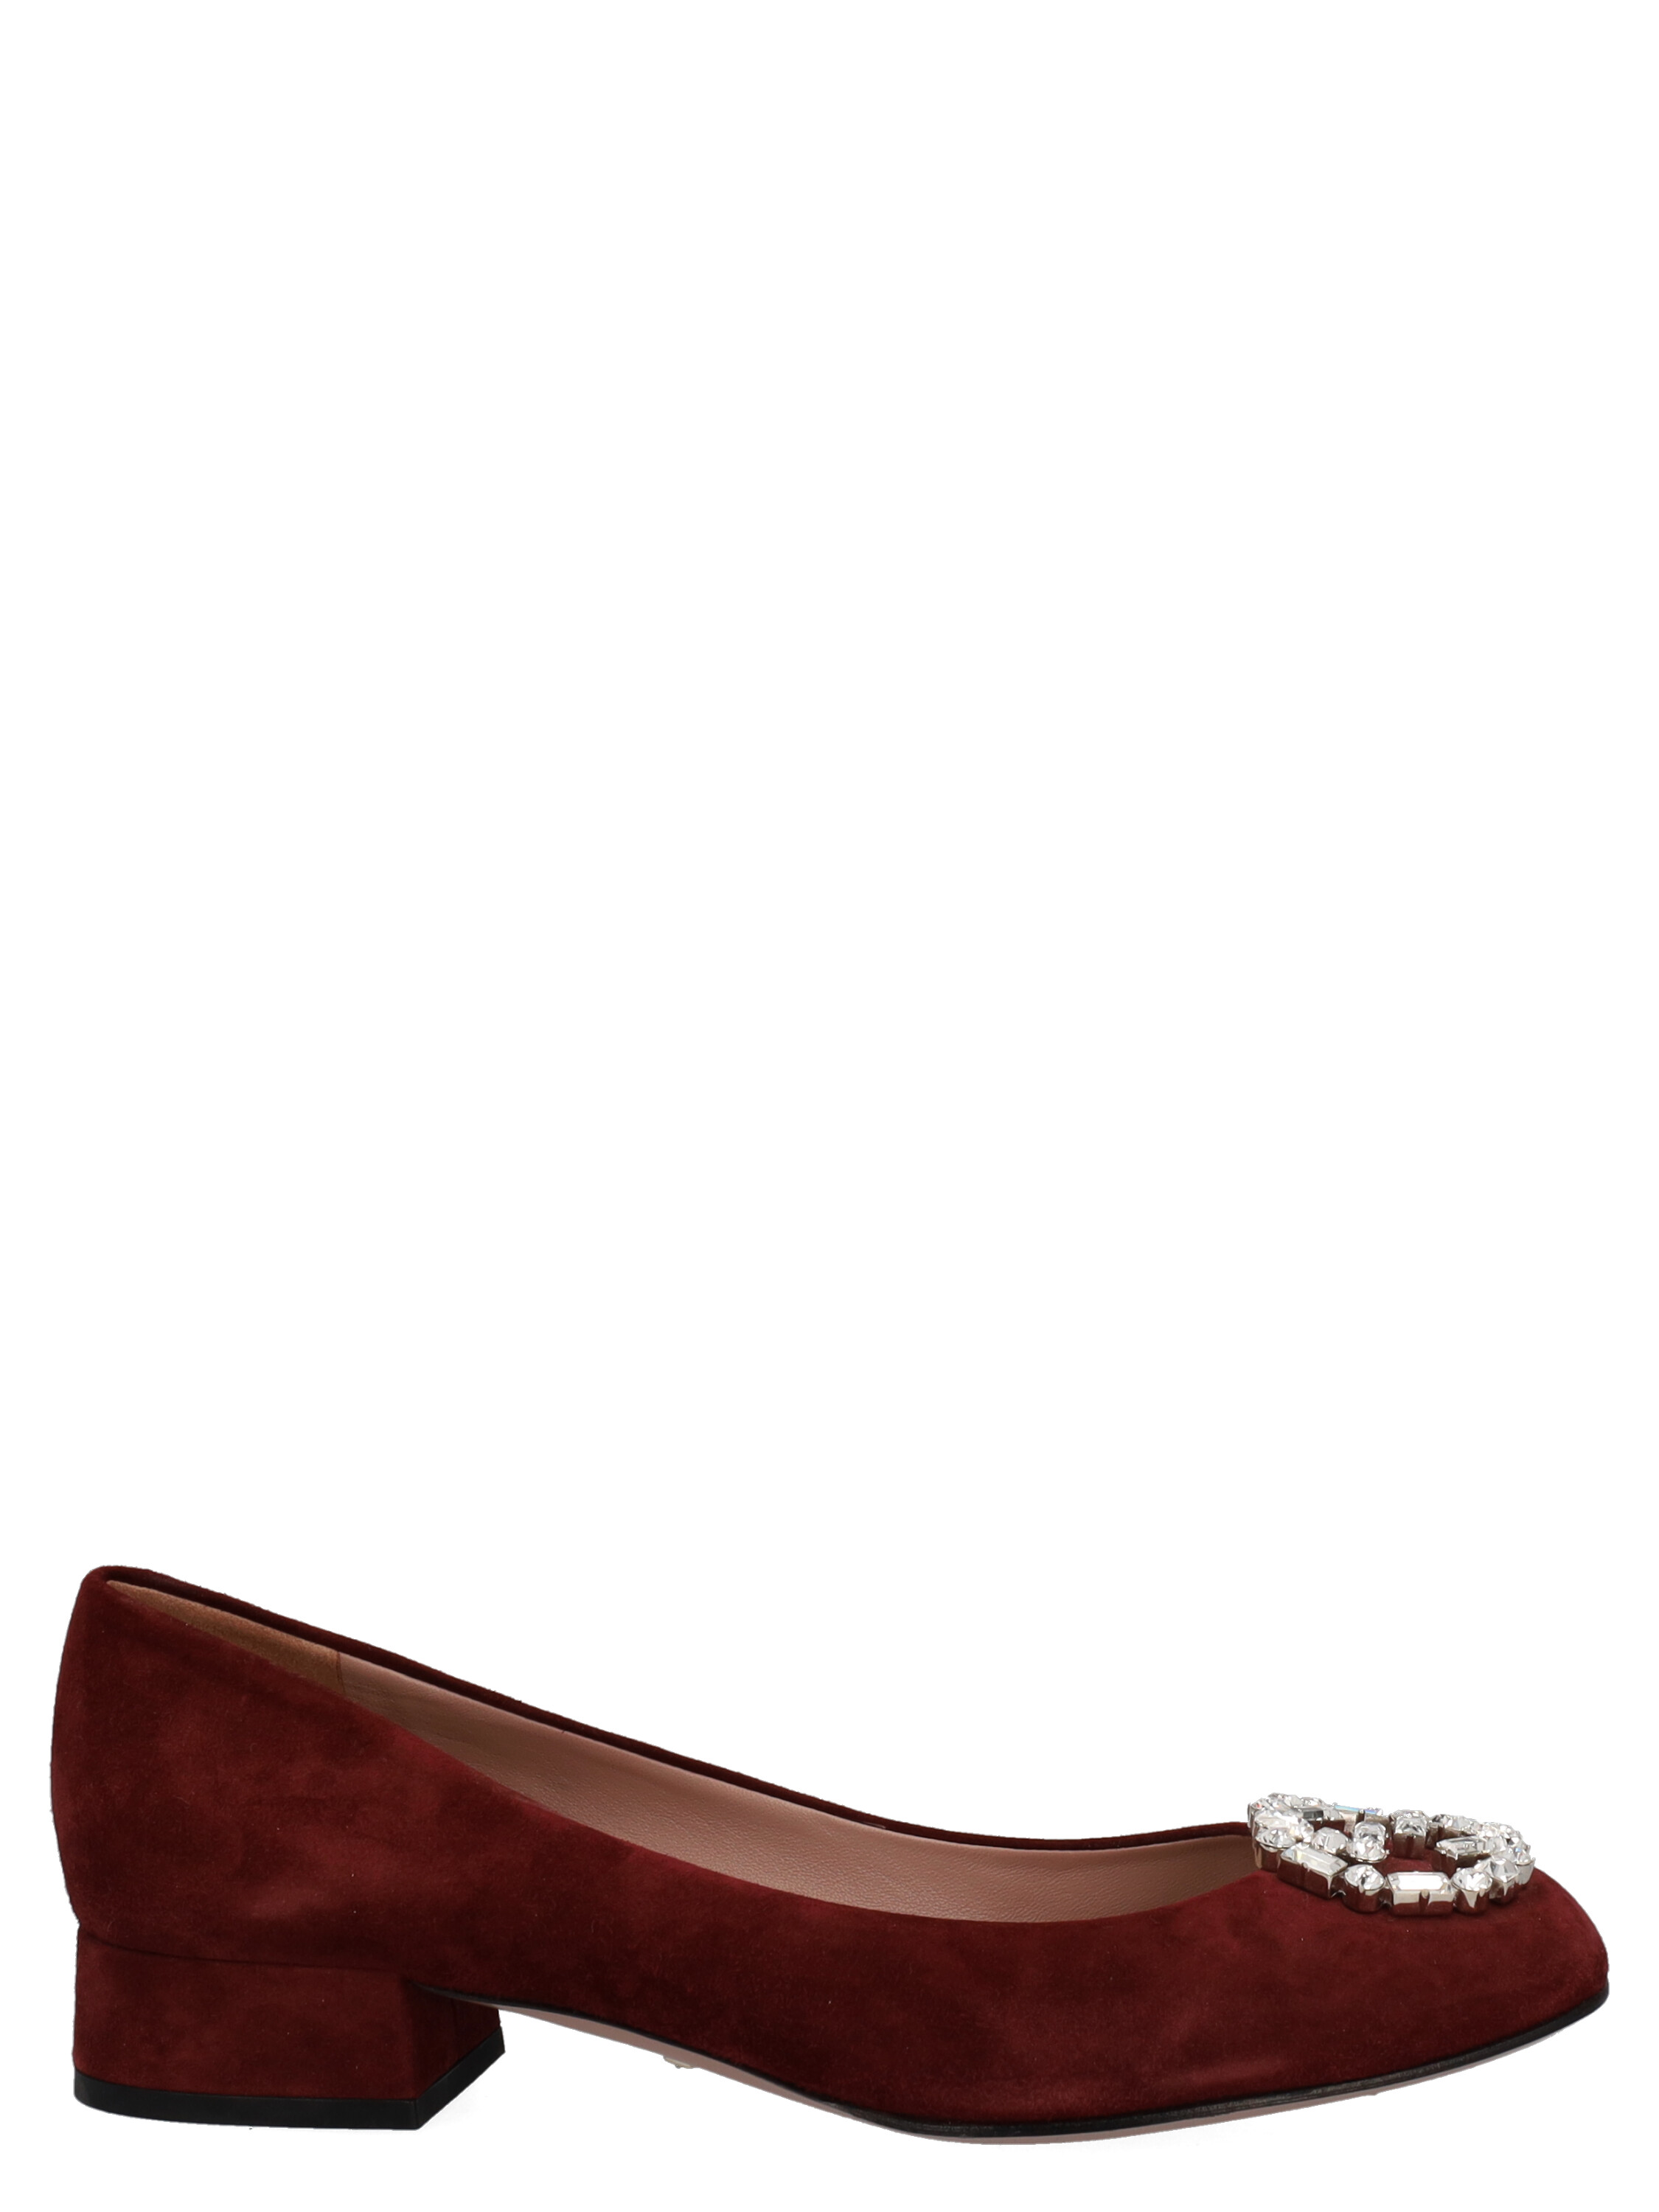 Pre-owned Gucci Women's Ballet Flats -  - In Burgundy Leather